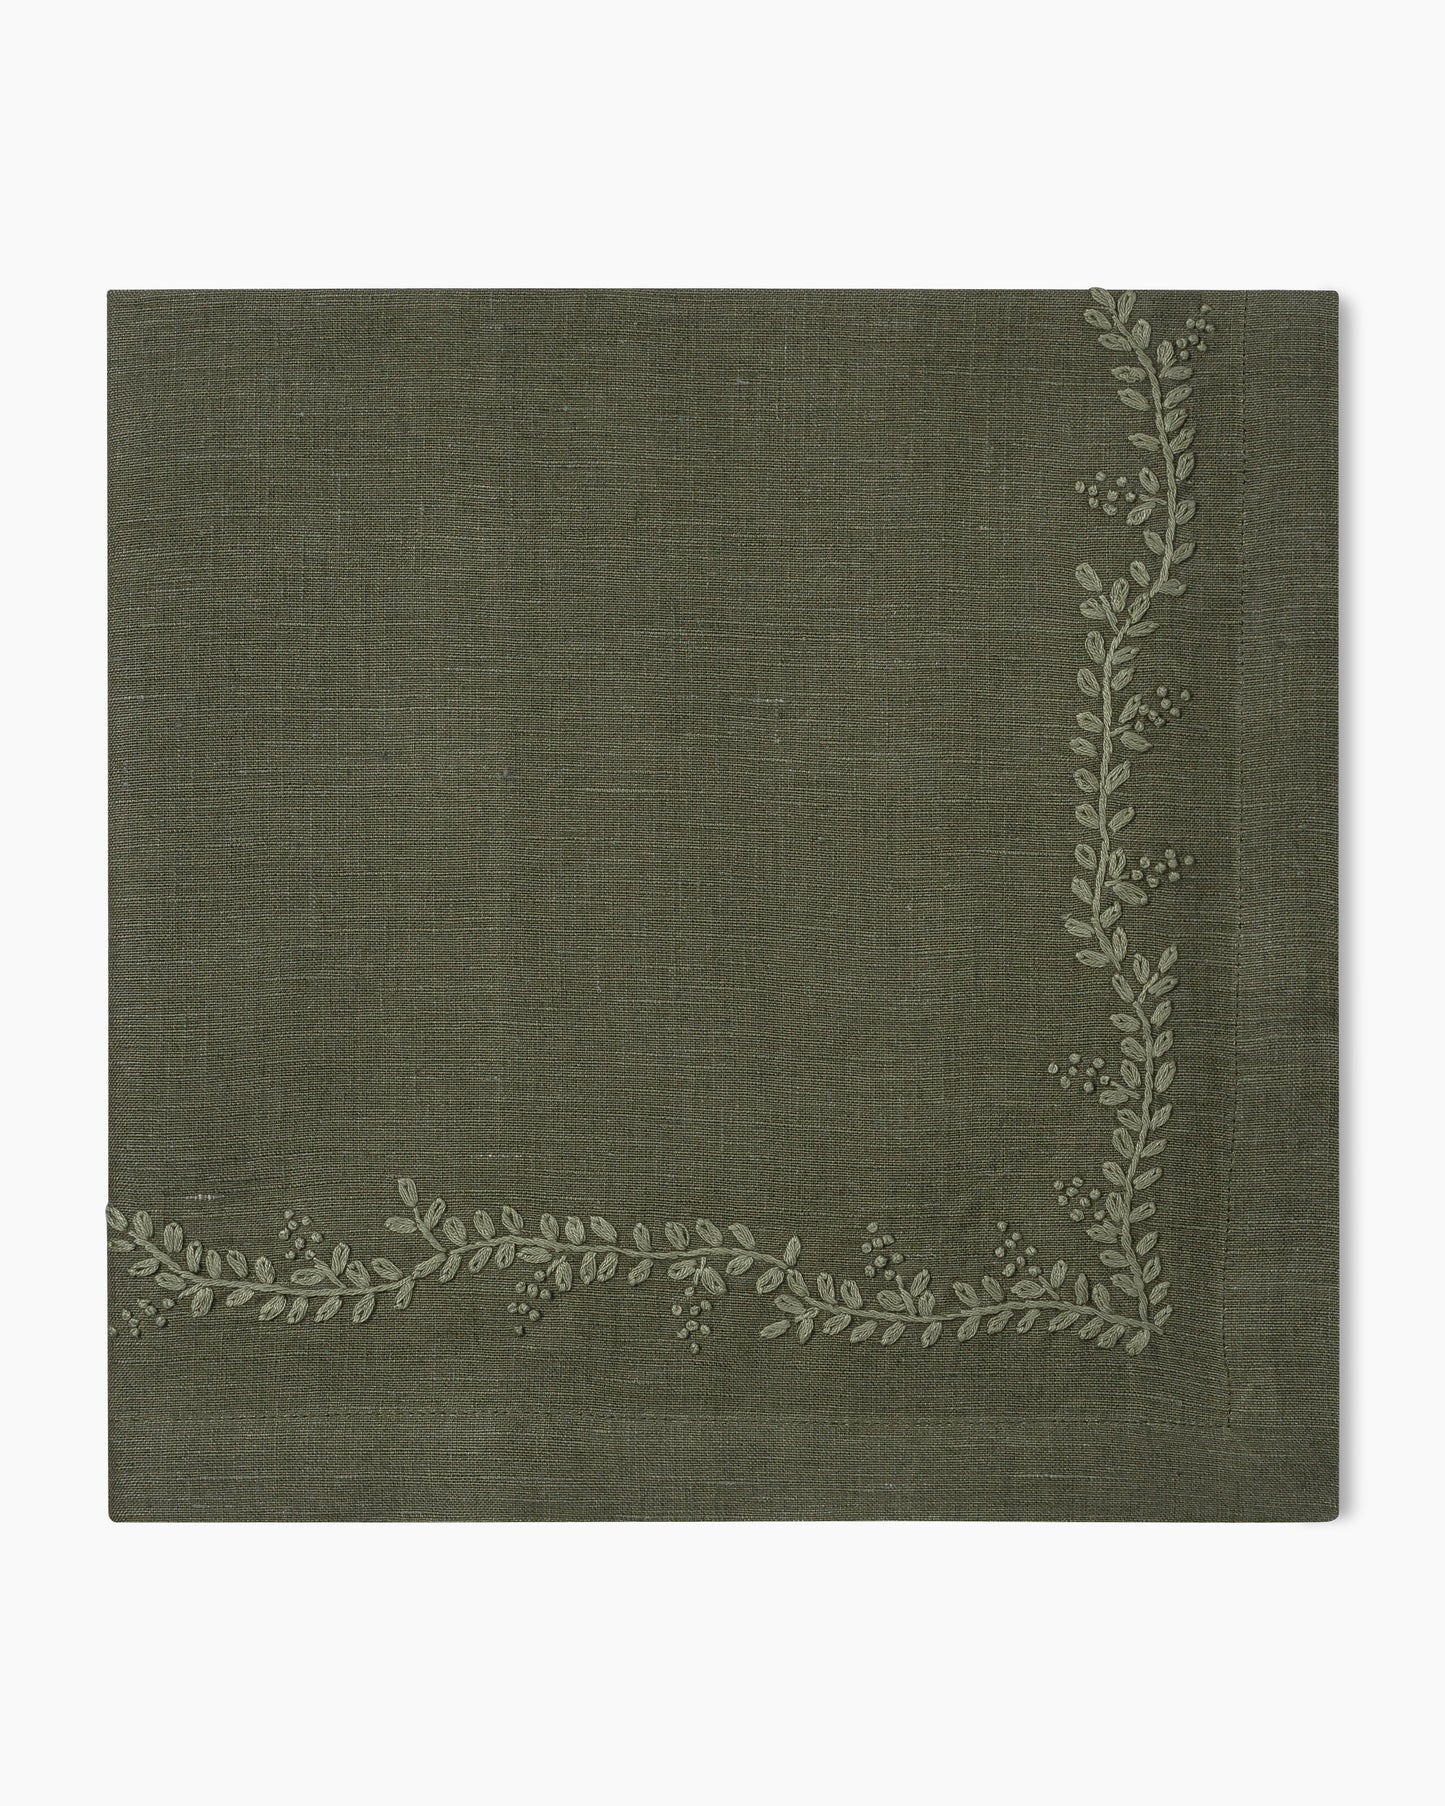 A Prism Vine Linen Dinner Napkin - 13 Colors by Henry Handwork, a table linen with a floral pattern.